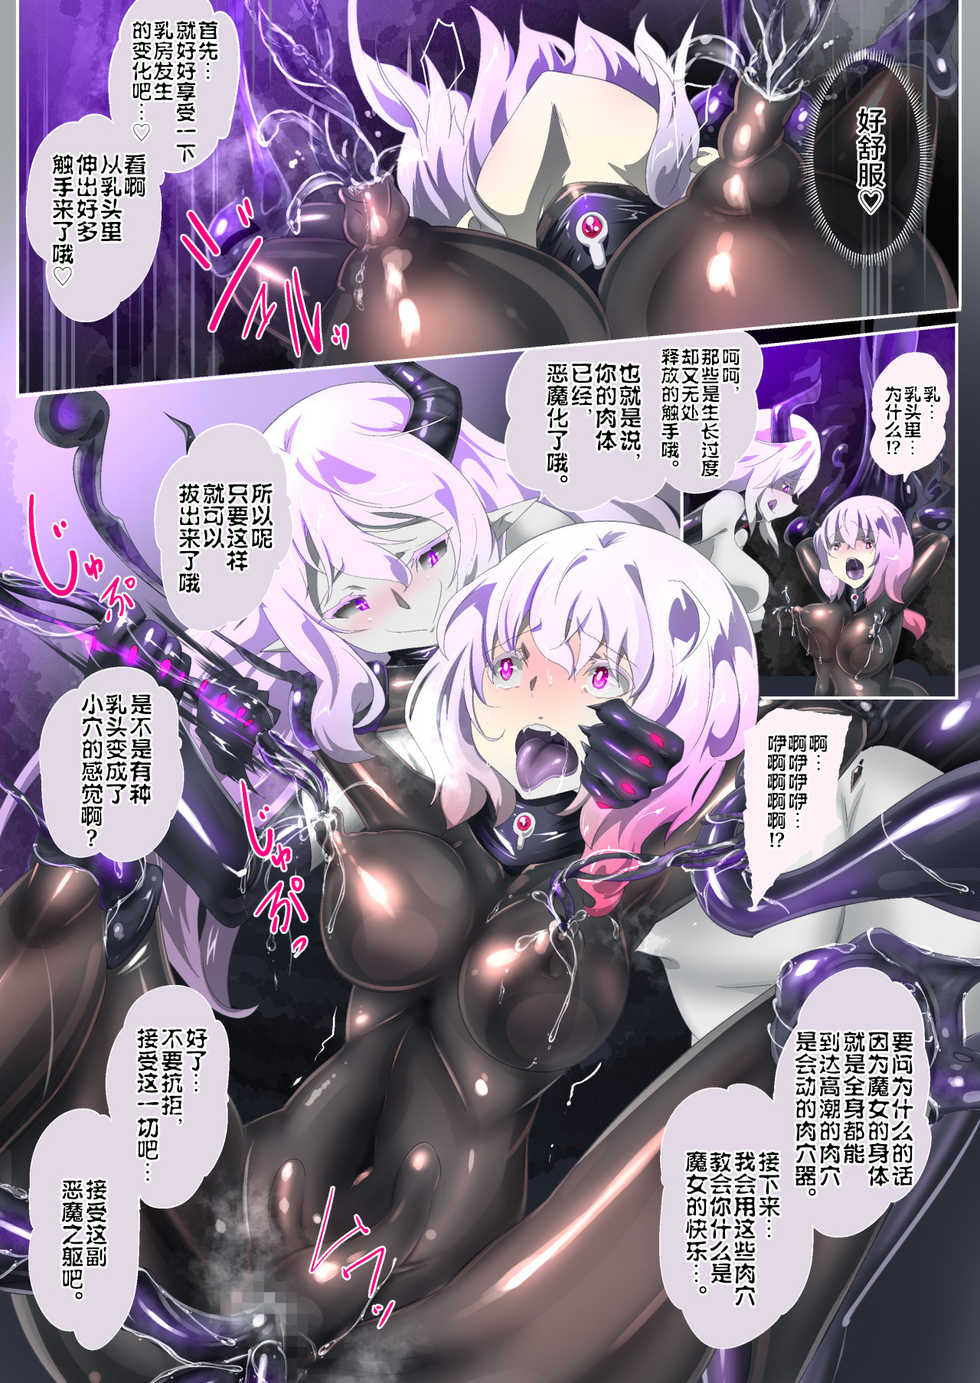 [Yaseuma-Lo-Ru] A Game Made Me a Succubus! [Chinese] [新桥月白日语社] - Page 7